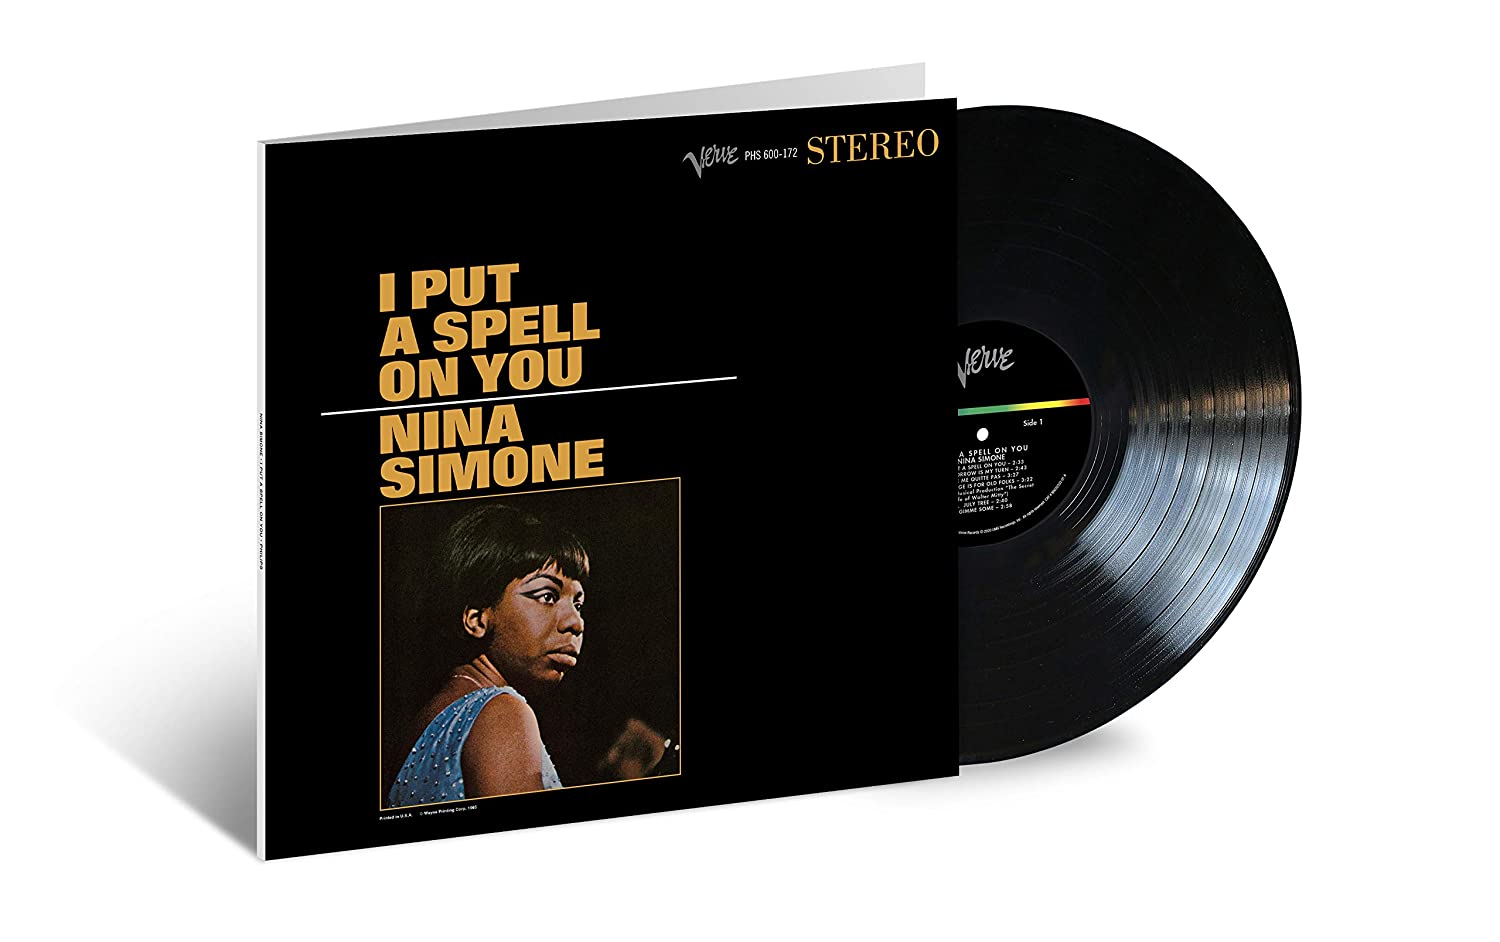 Nina Simone - "I Put a Spell on You" (Acoustic Sounds Series) 